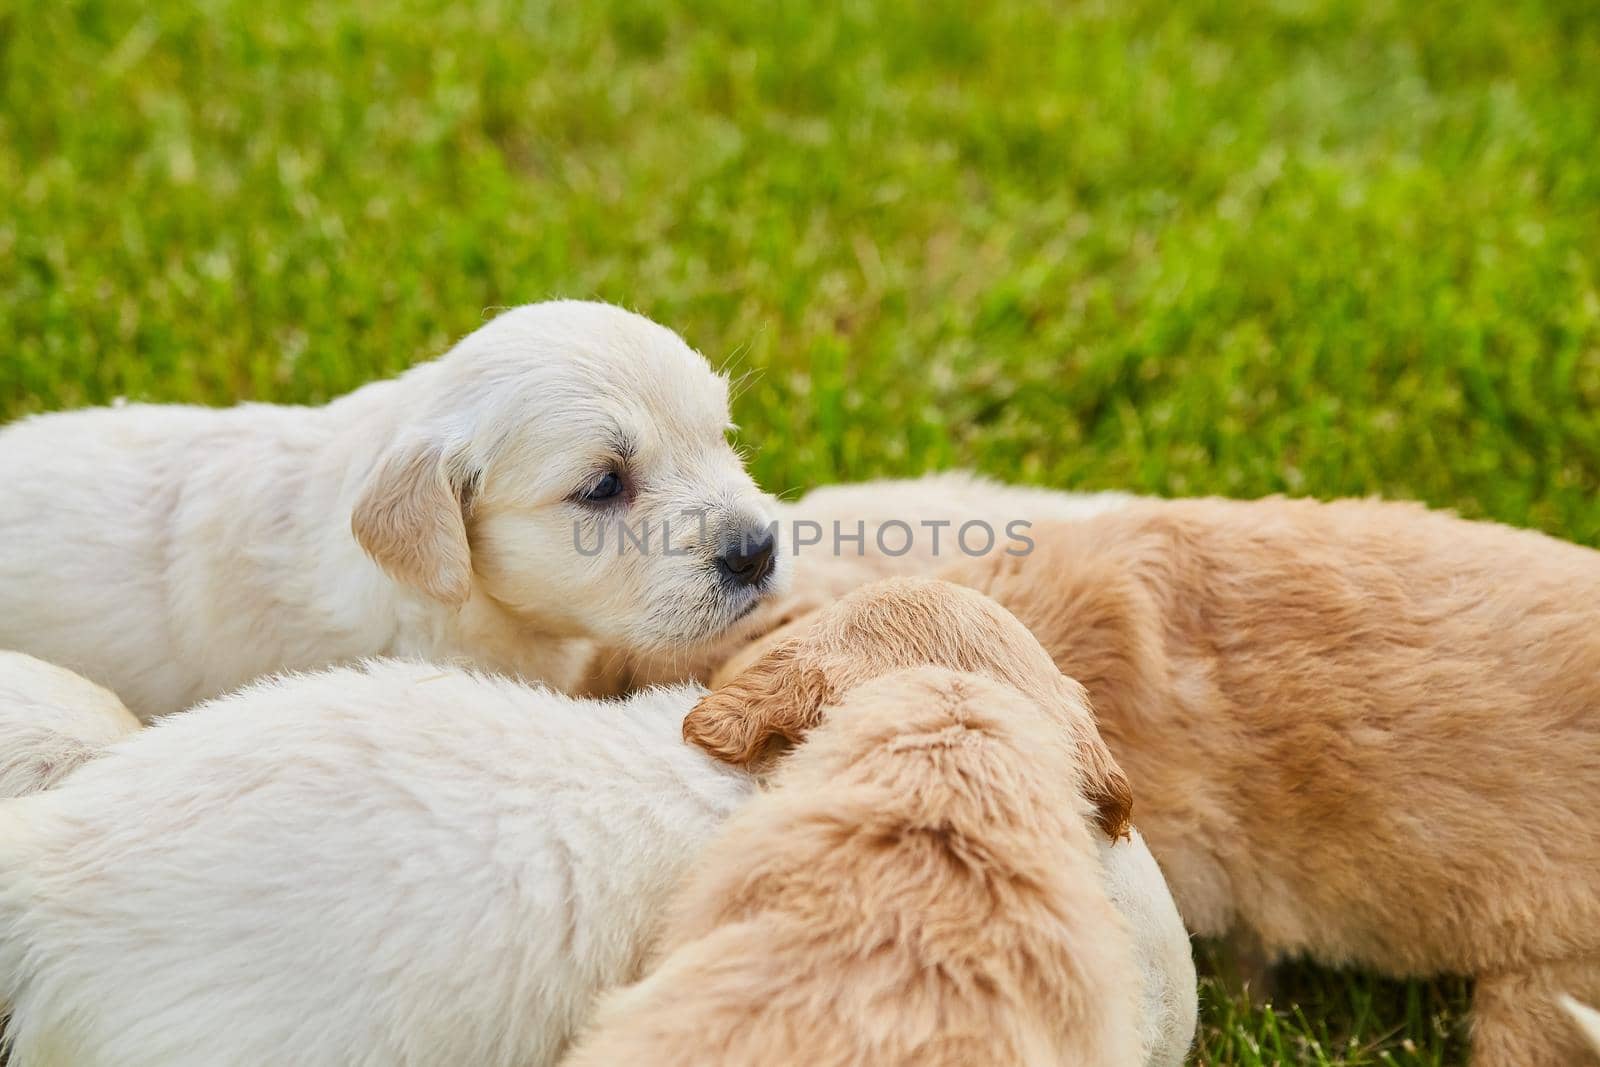 Image of Litter of golden retriever puppies of creme and brown